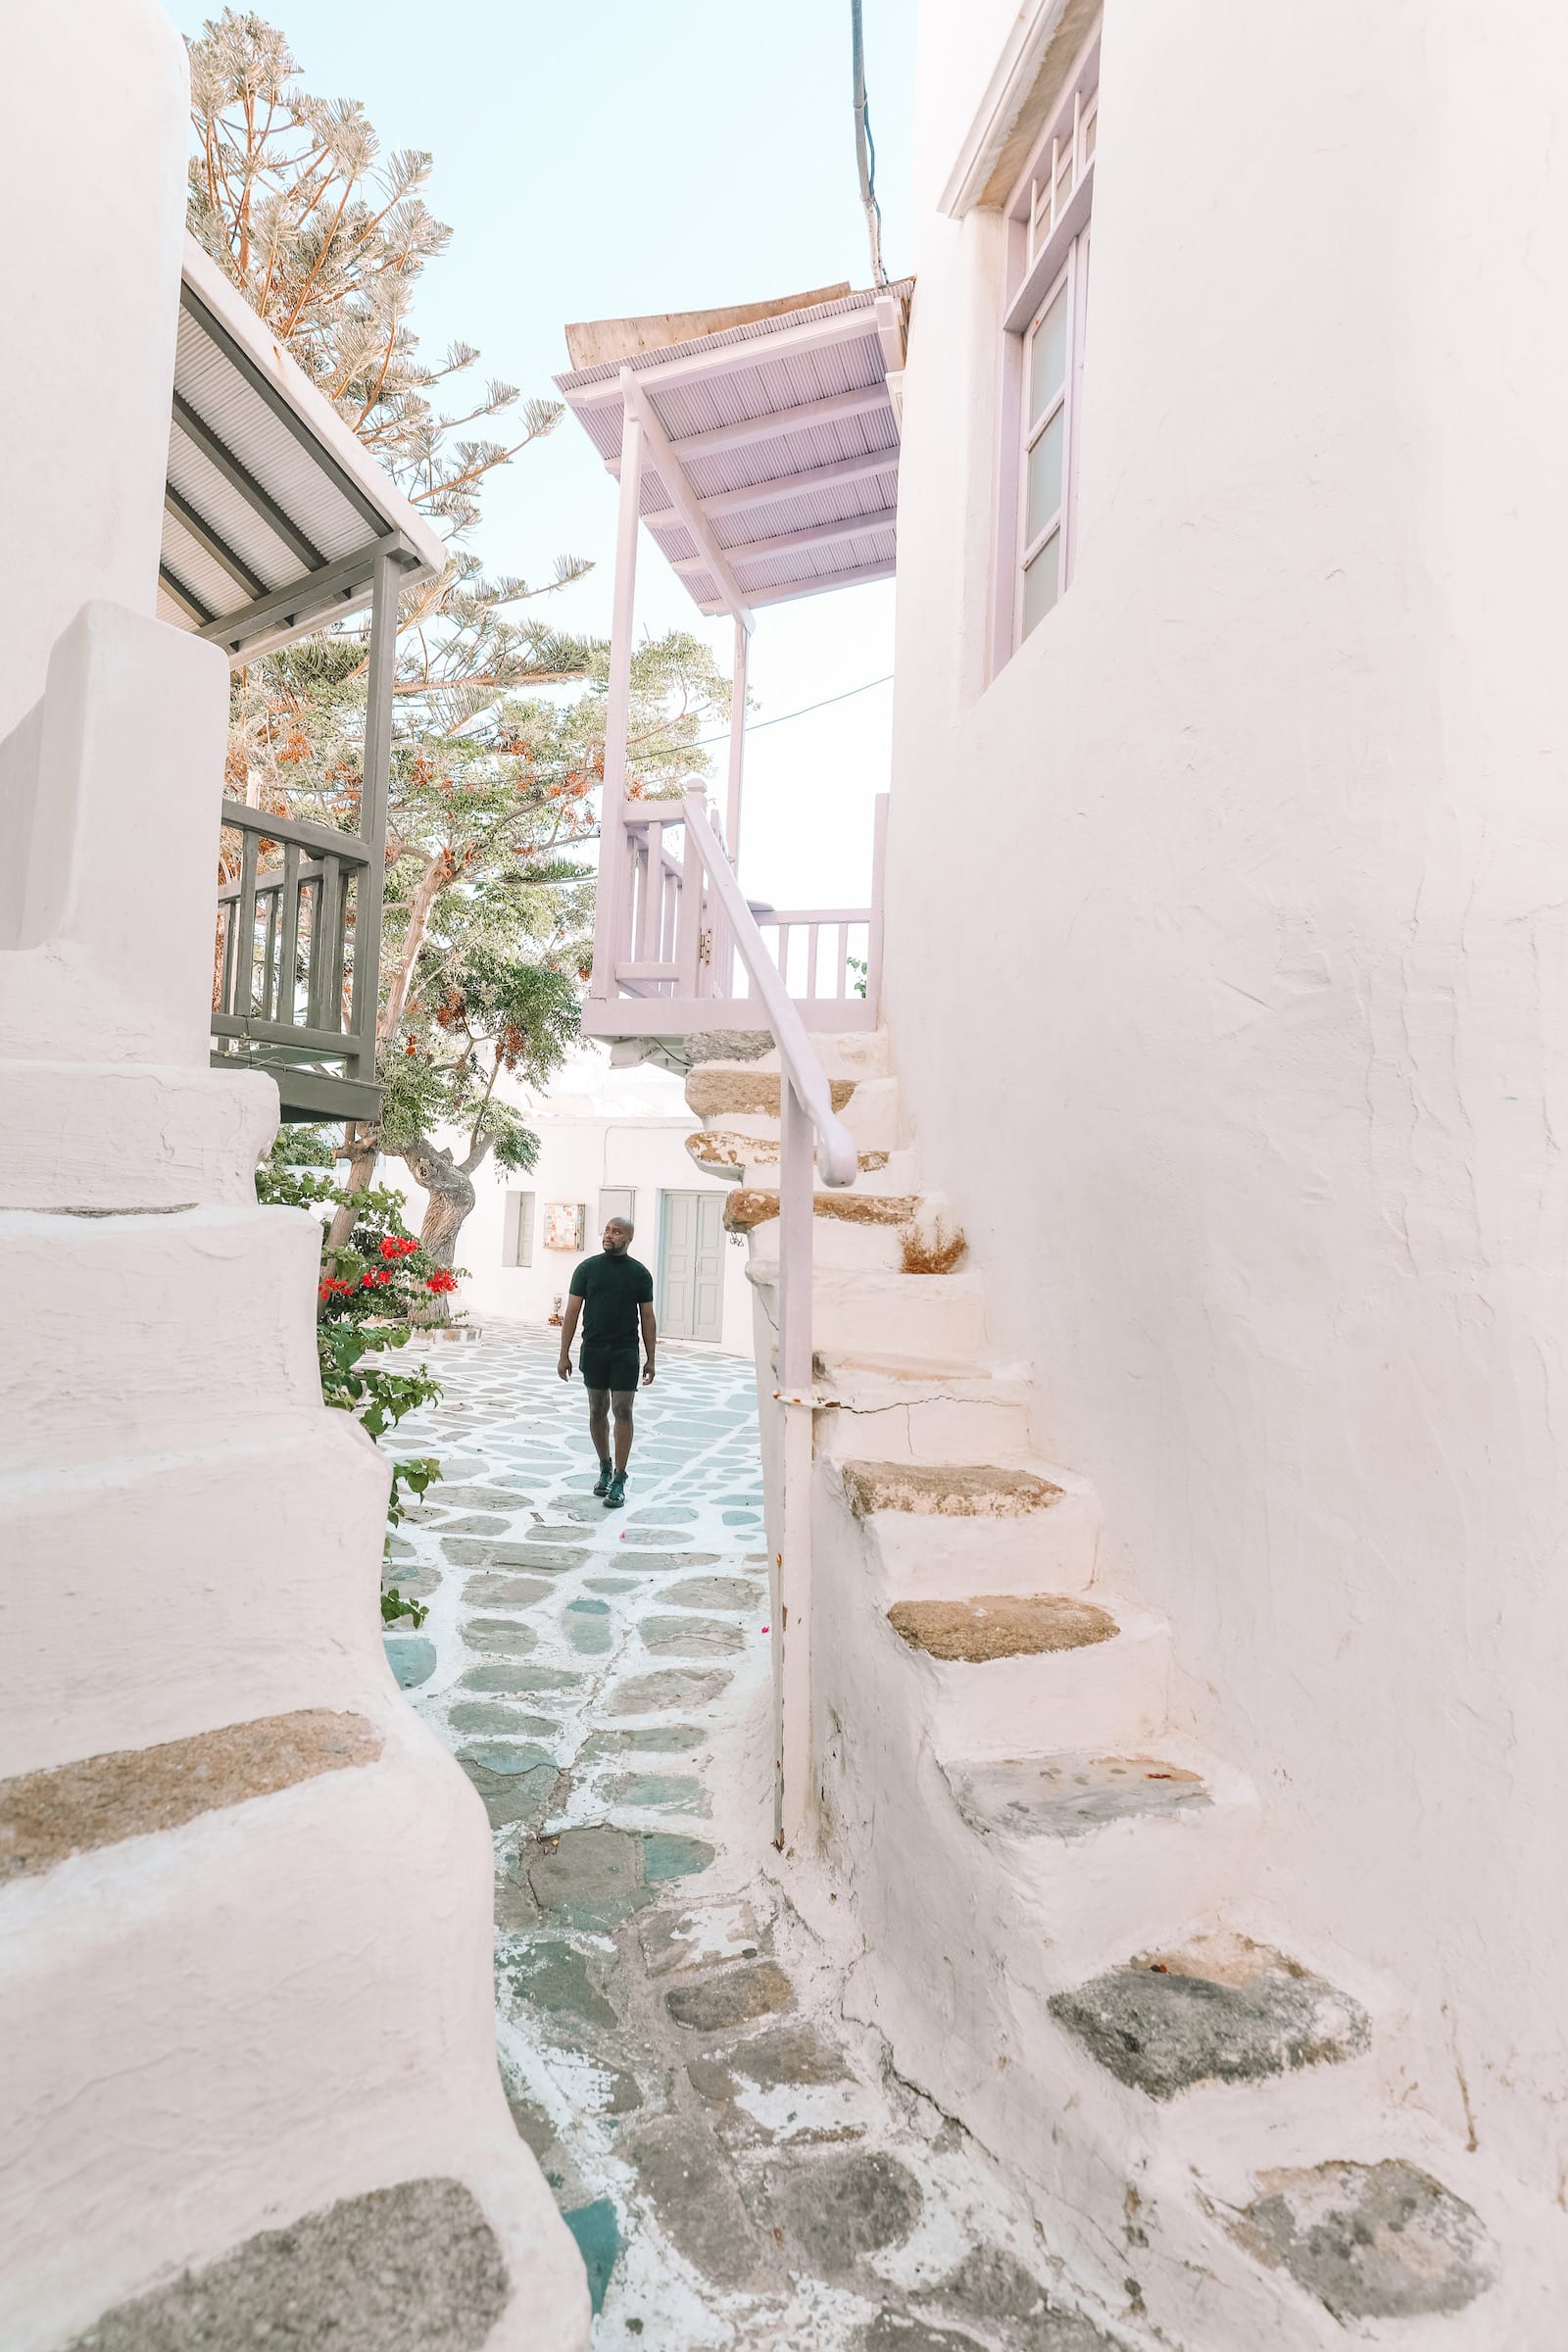 12 Very Best Islands To Visit In The Cyclades, Greece - Hand Luggage Only